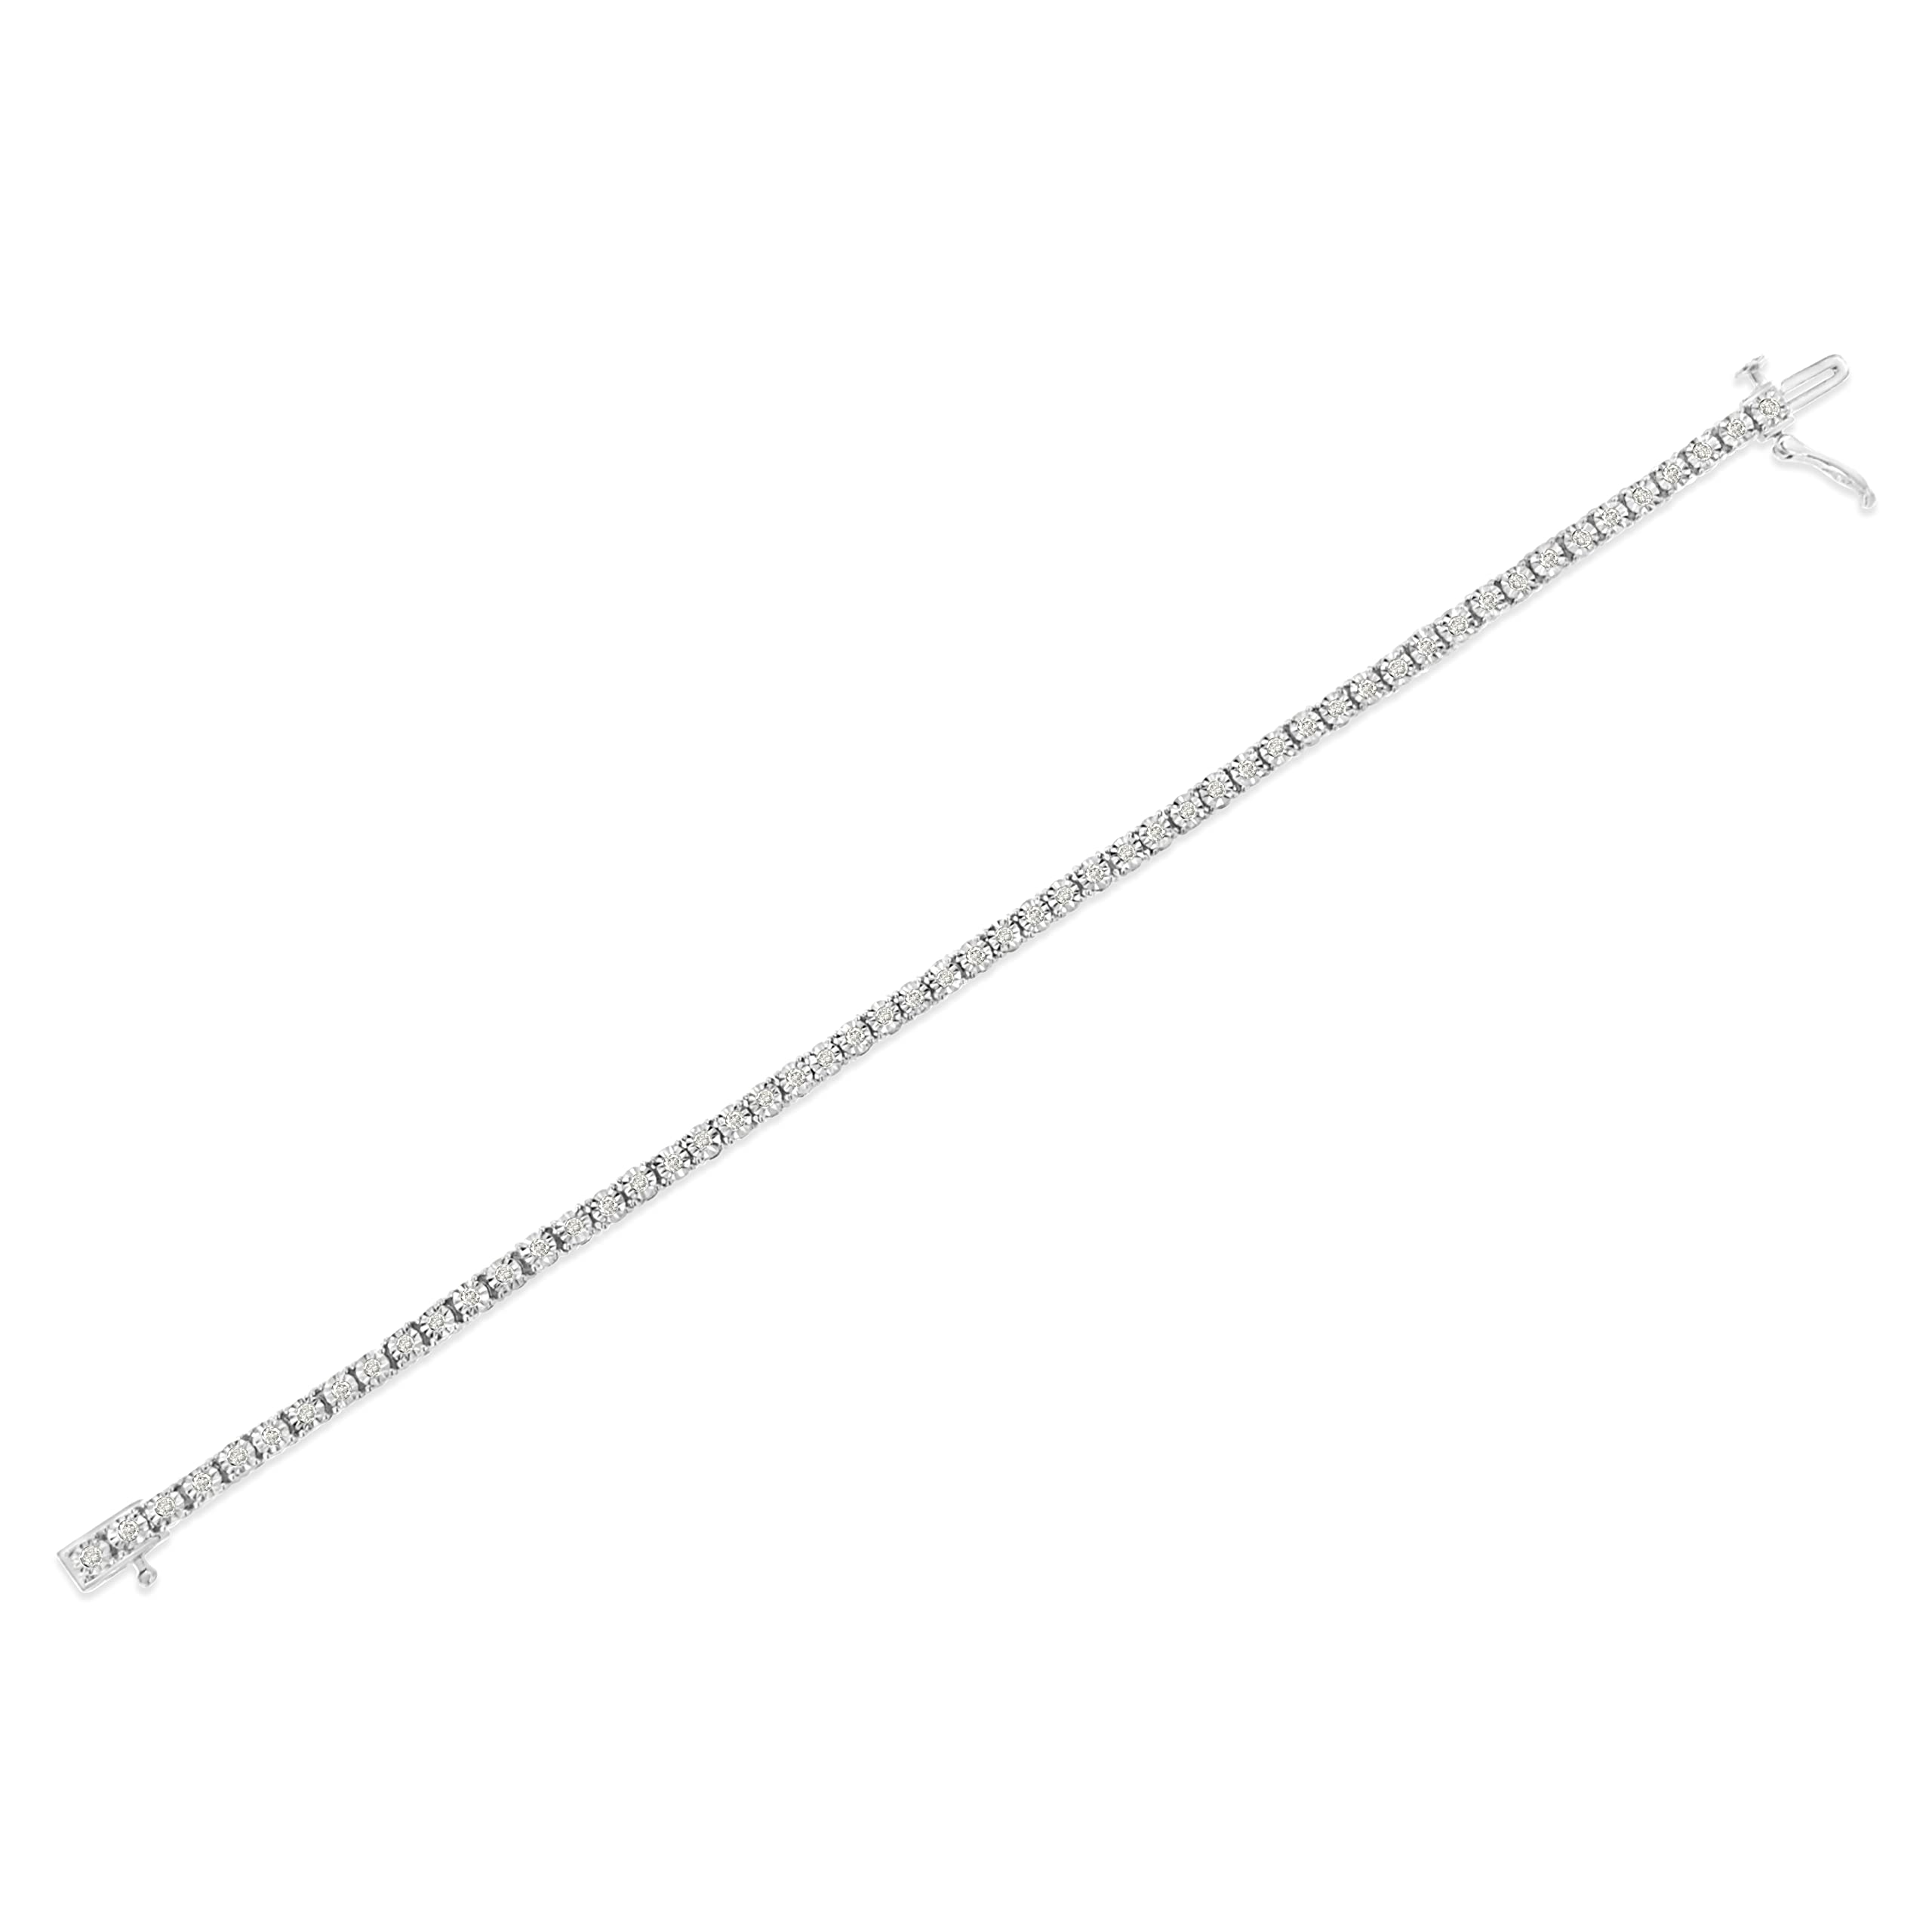 Original Classics 1.0 Cttw Miracle-Set Diamond Round Faceted Bezel Tennis Bracelet Sterling Silver (I-J, I3) - Choice of Metal Color and Size